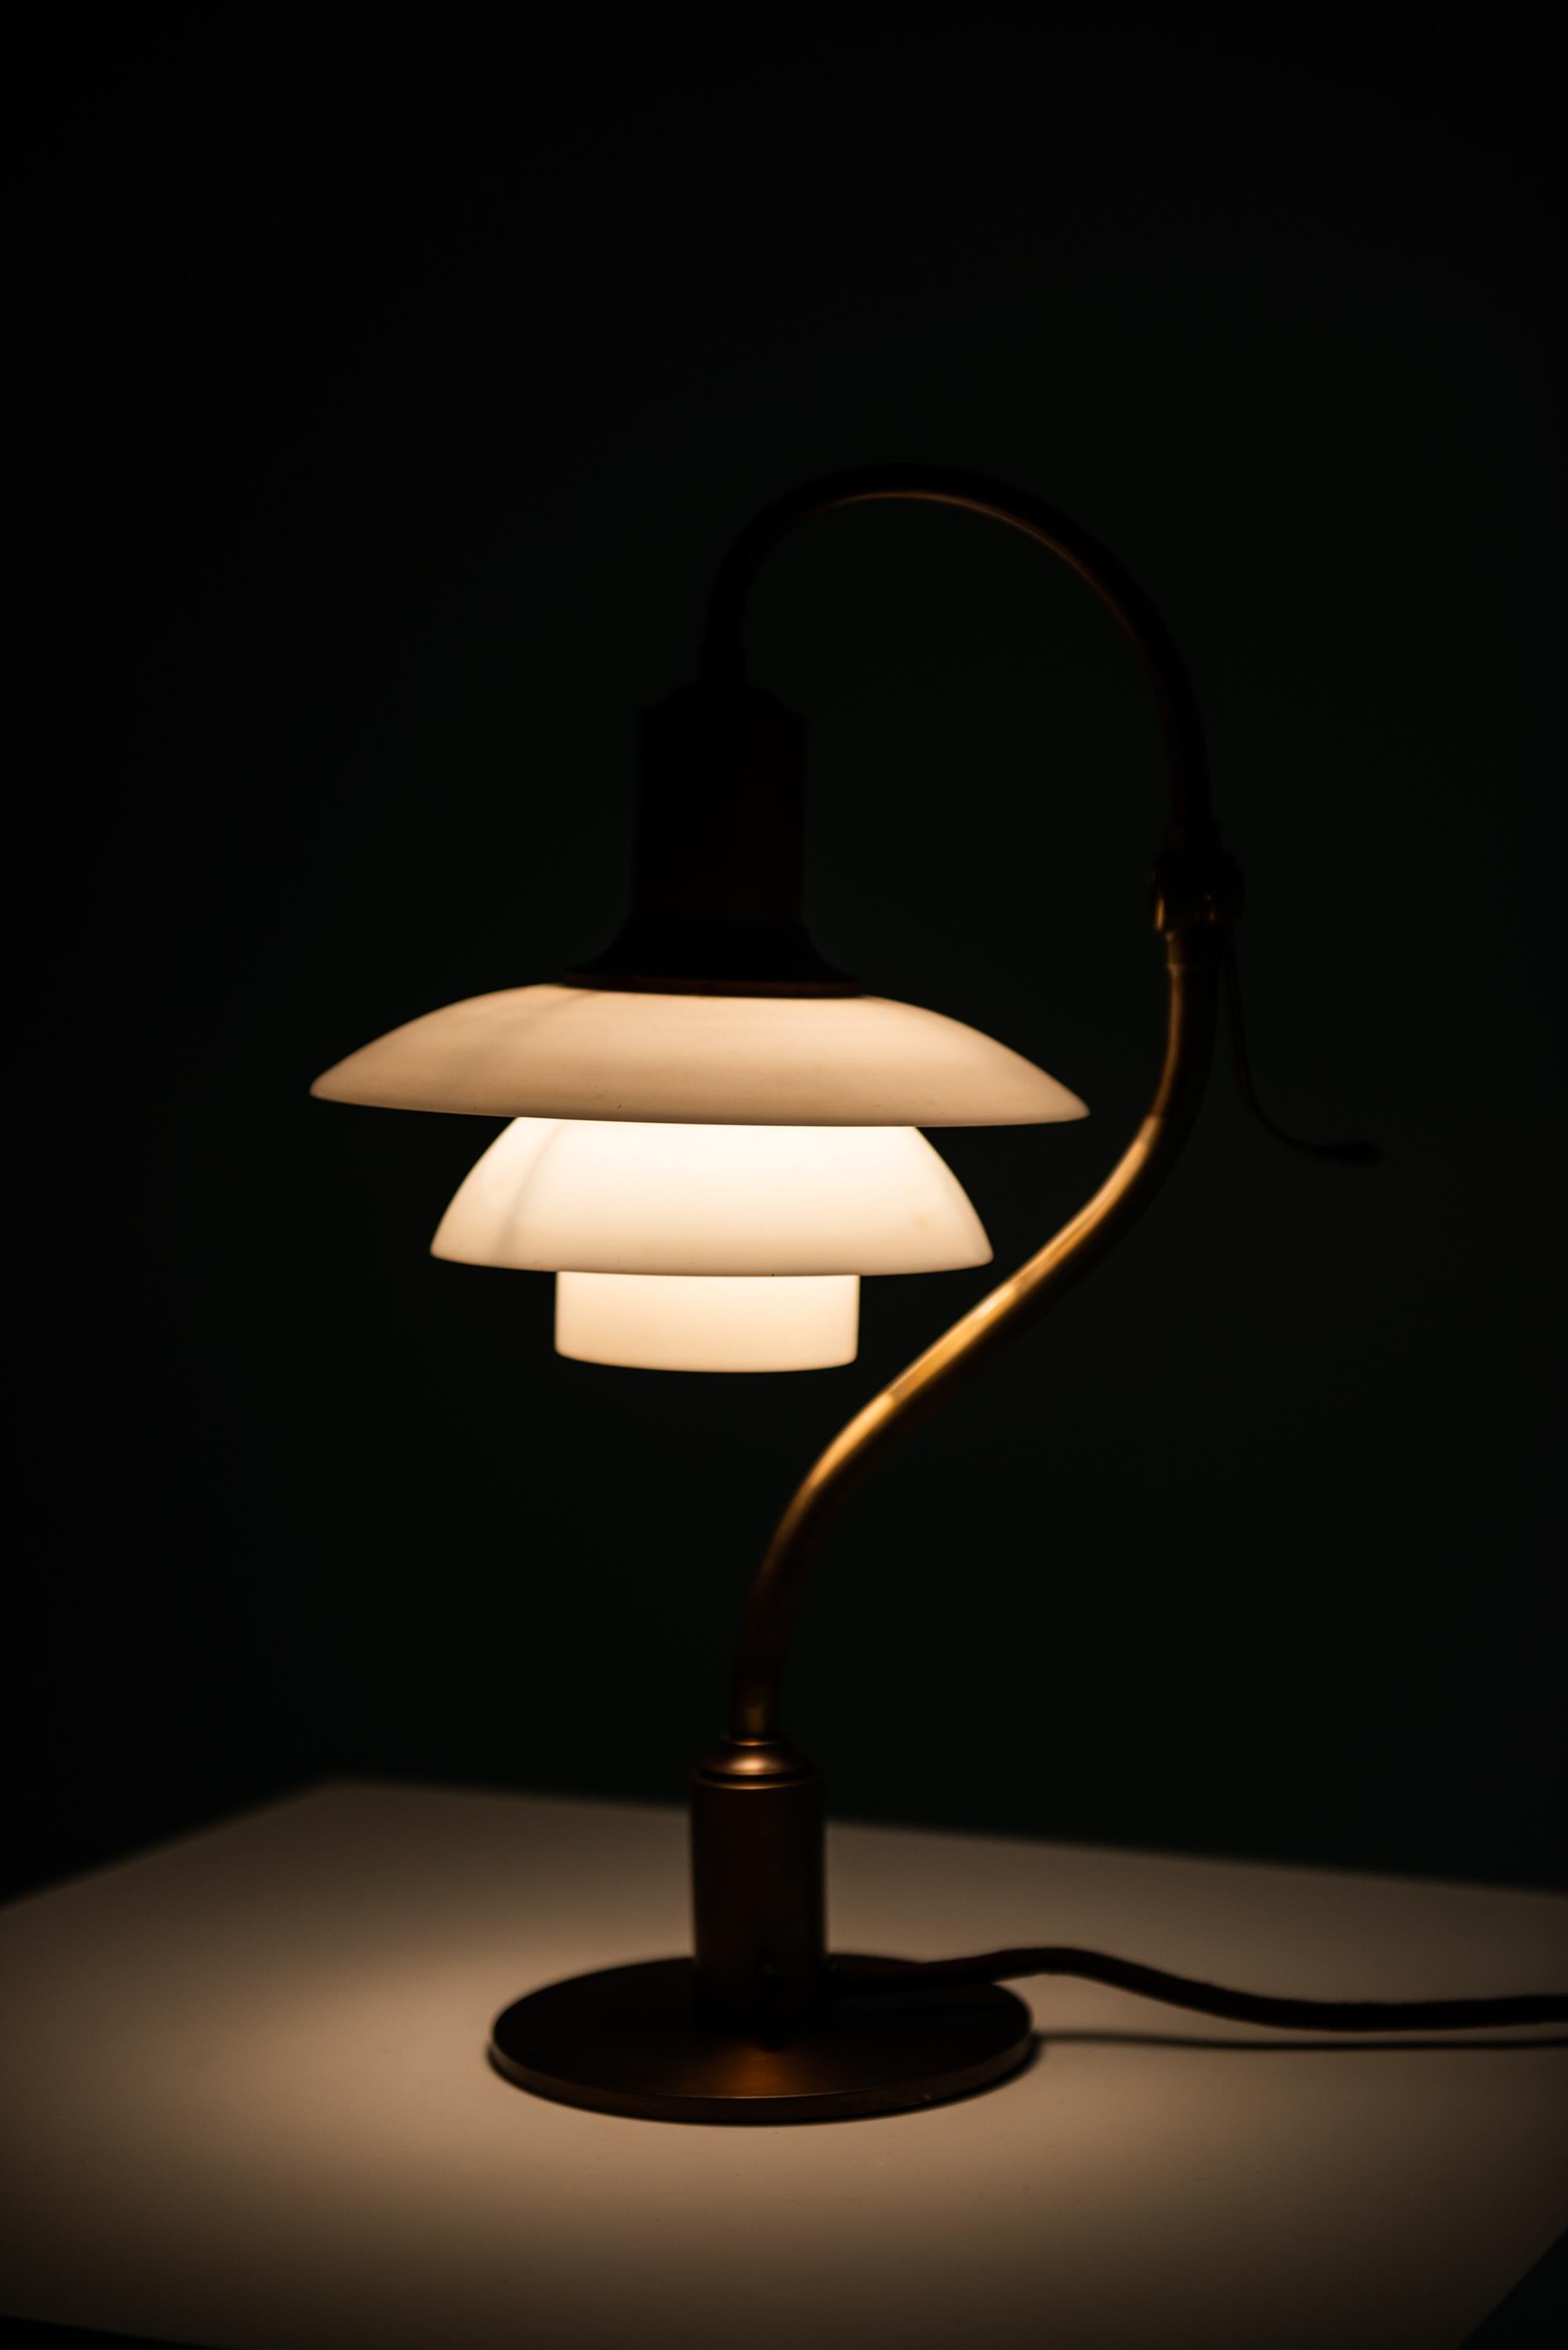 Mid-20th Century Poul Henningsen Table Lamp Model PH-2/2 'The Questions Mark' by Louis Poulsen For Sale